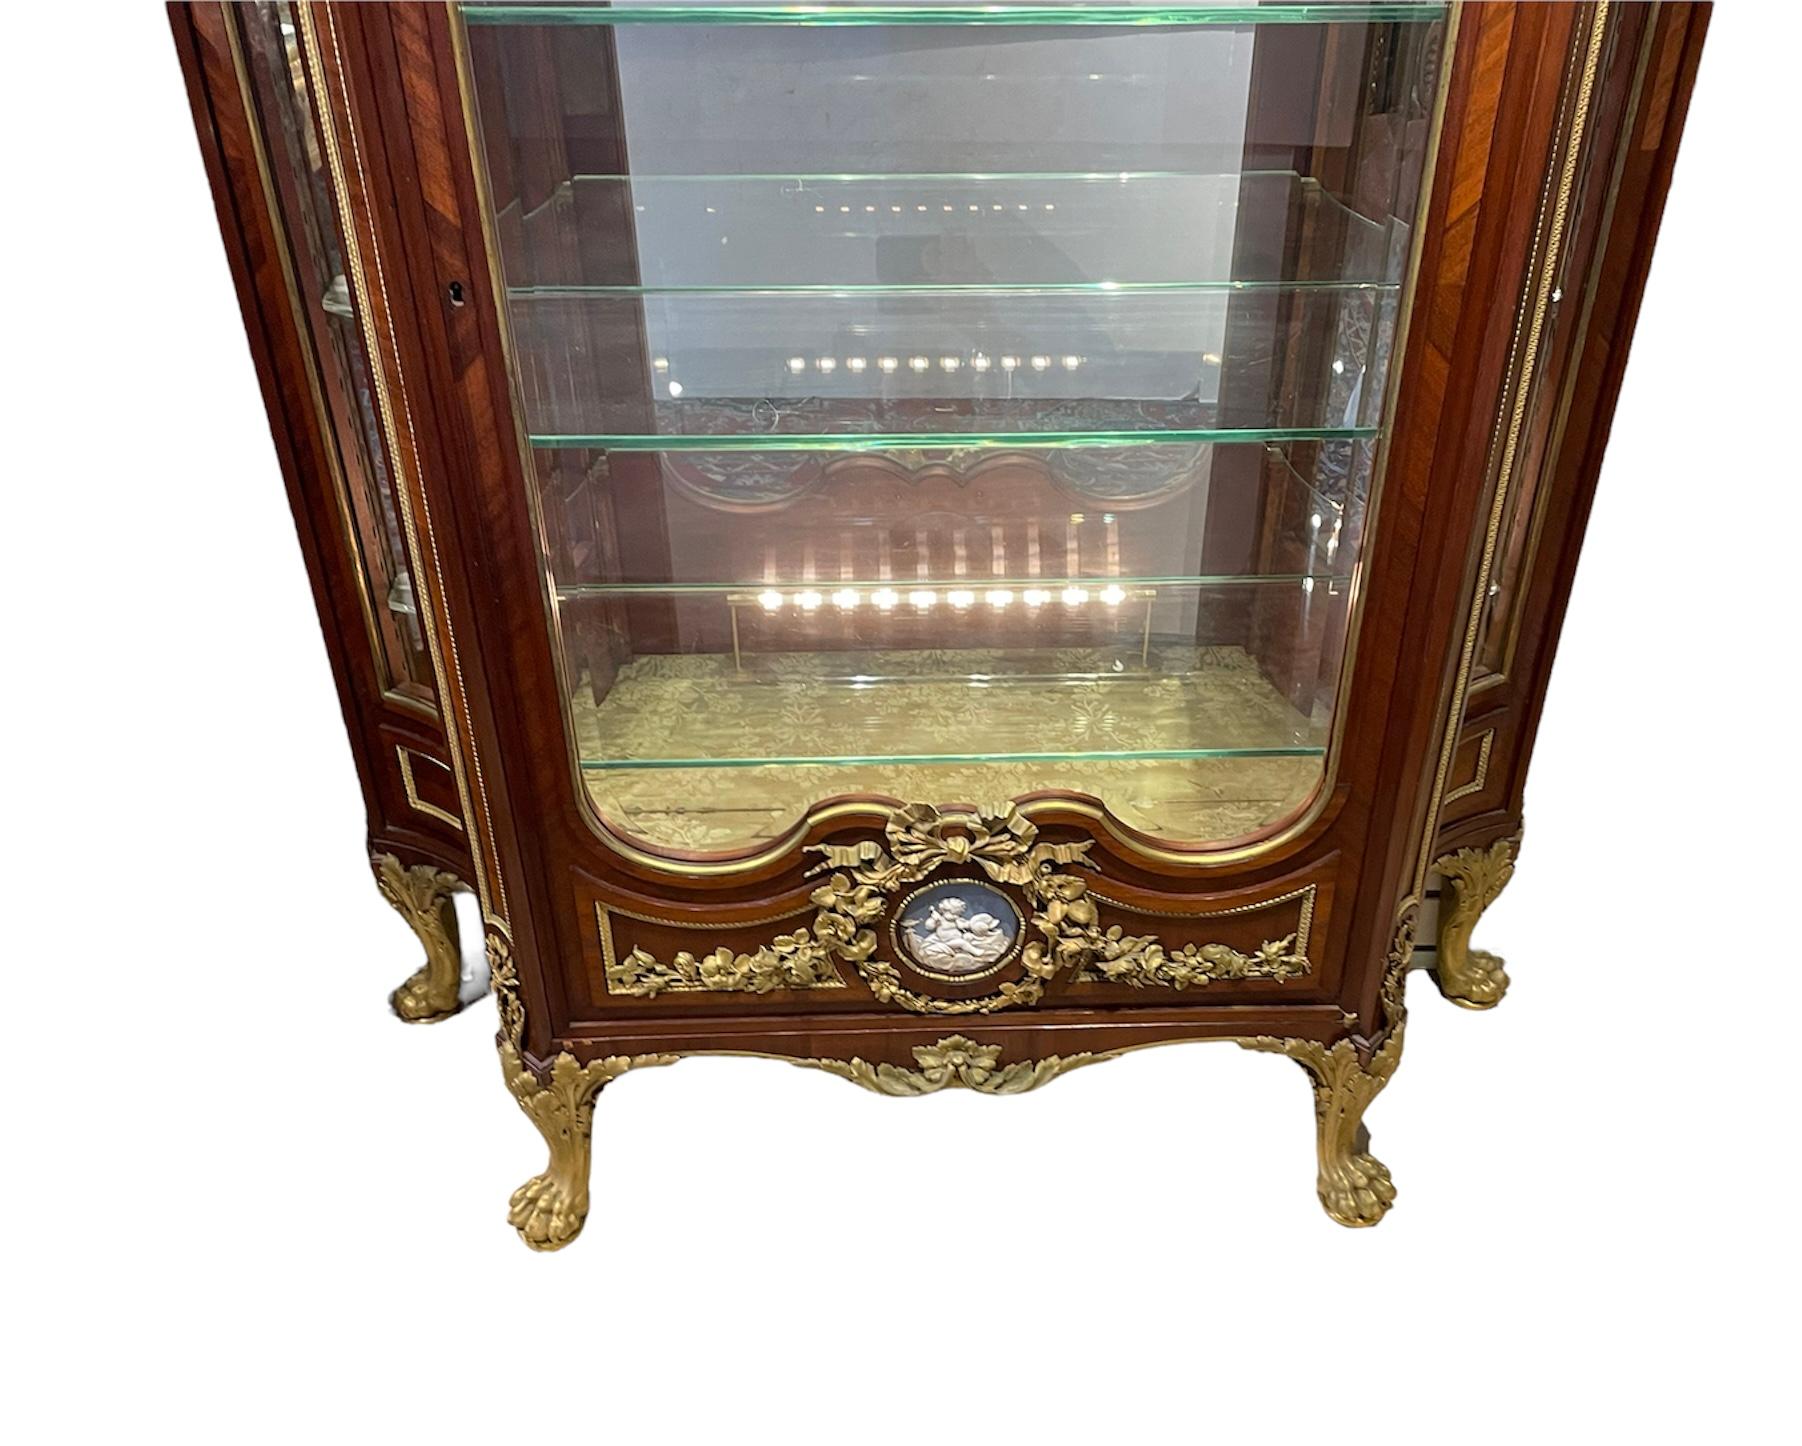 This is an Empire style gilt bronze mounted wood, glass and marble top heavy and large vitrine/curio cabinet. The wide tapered rectangular vitrine has four glass walls framed with wood. The front door is one of them and it is beveled. It is